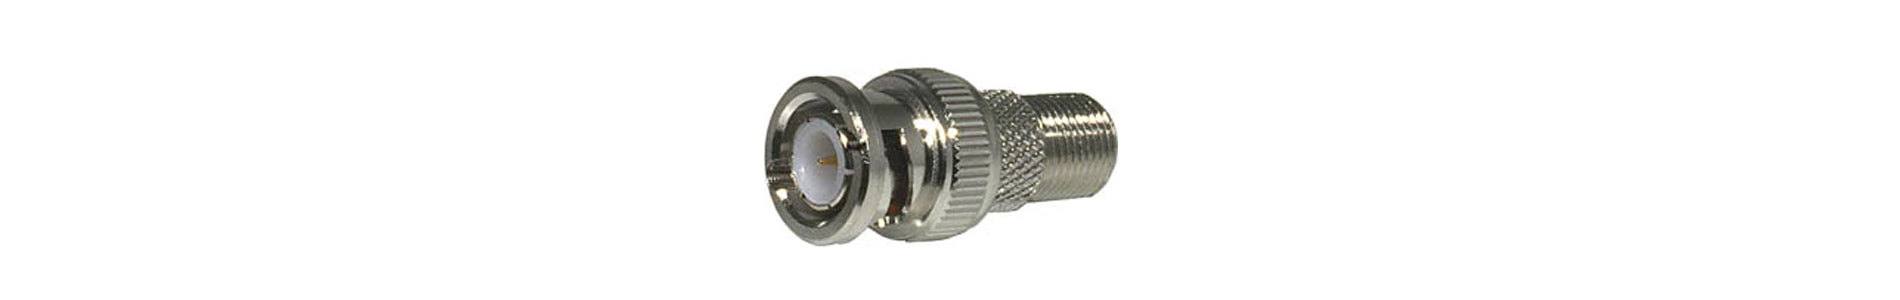 Coaxial Couplers and Adapters